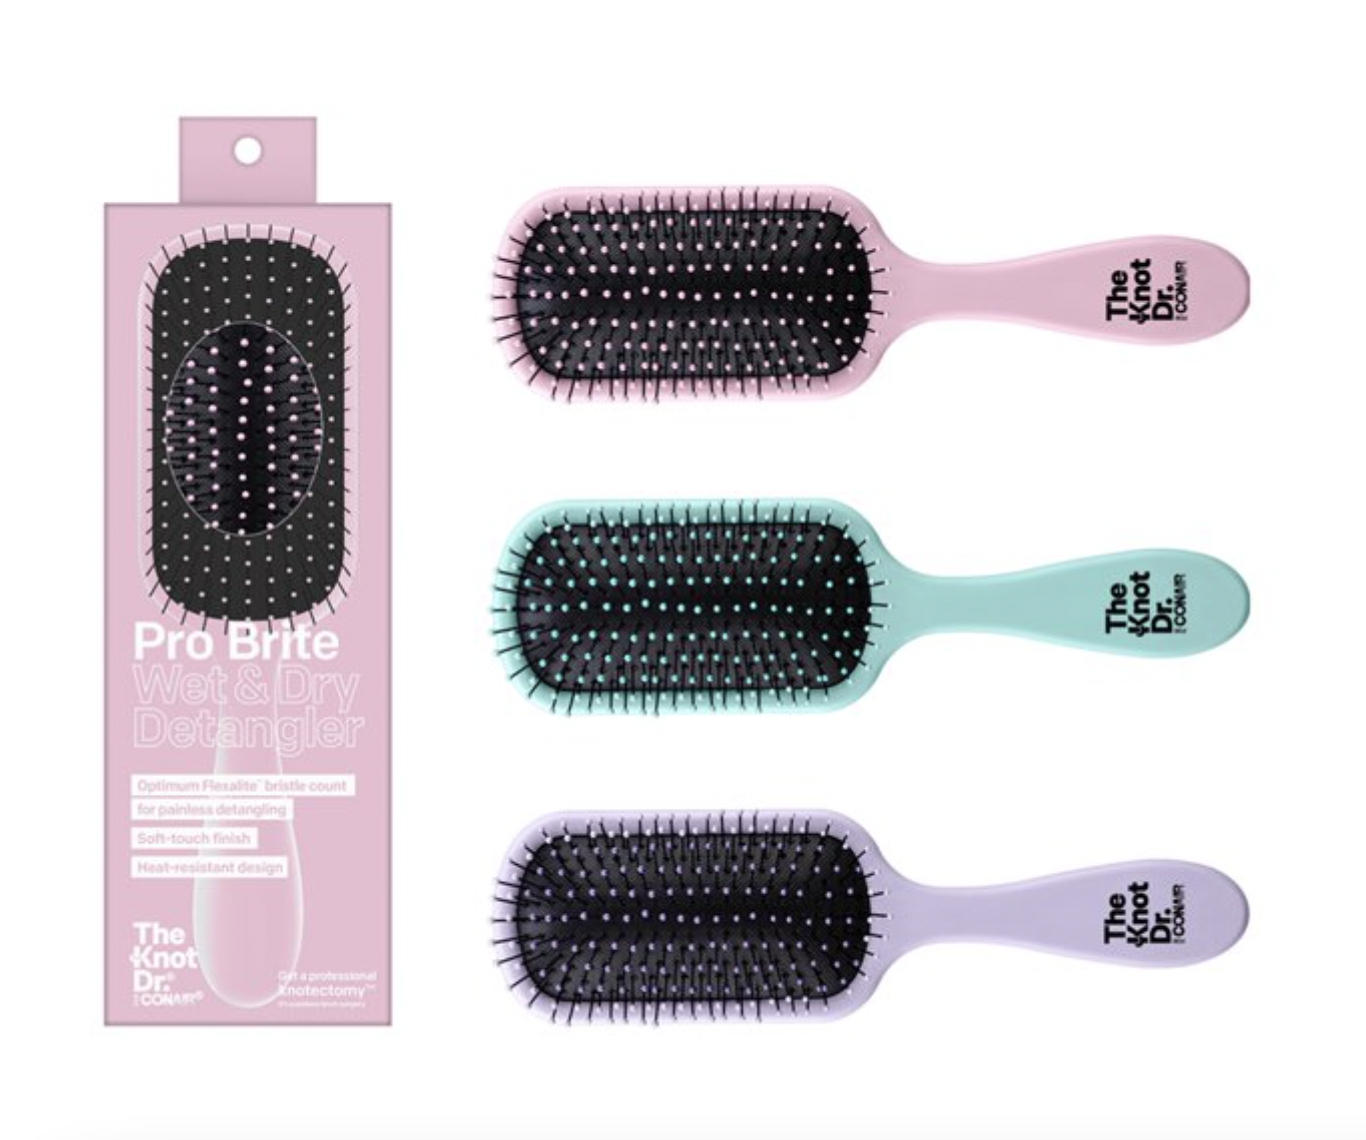 The Knot Dr. for Conair Pro Brite Wet and Dry Detangling Hair Brush, in pink, green, and purple